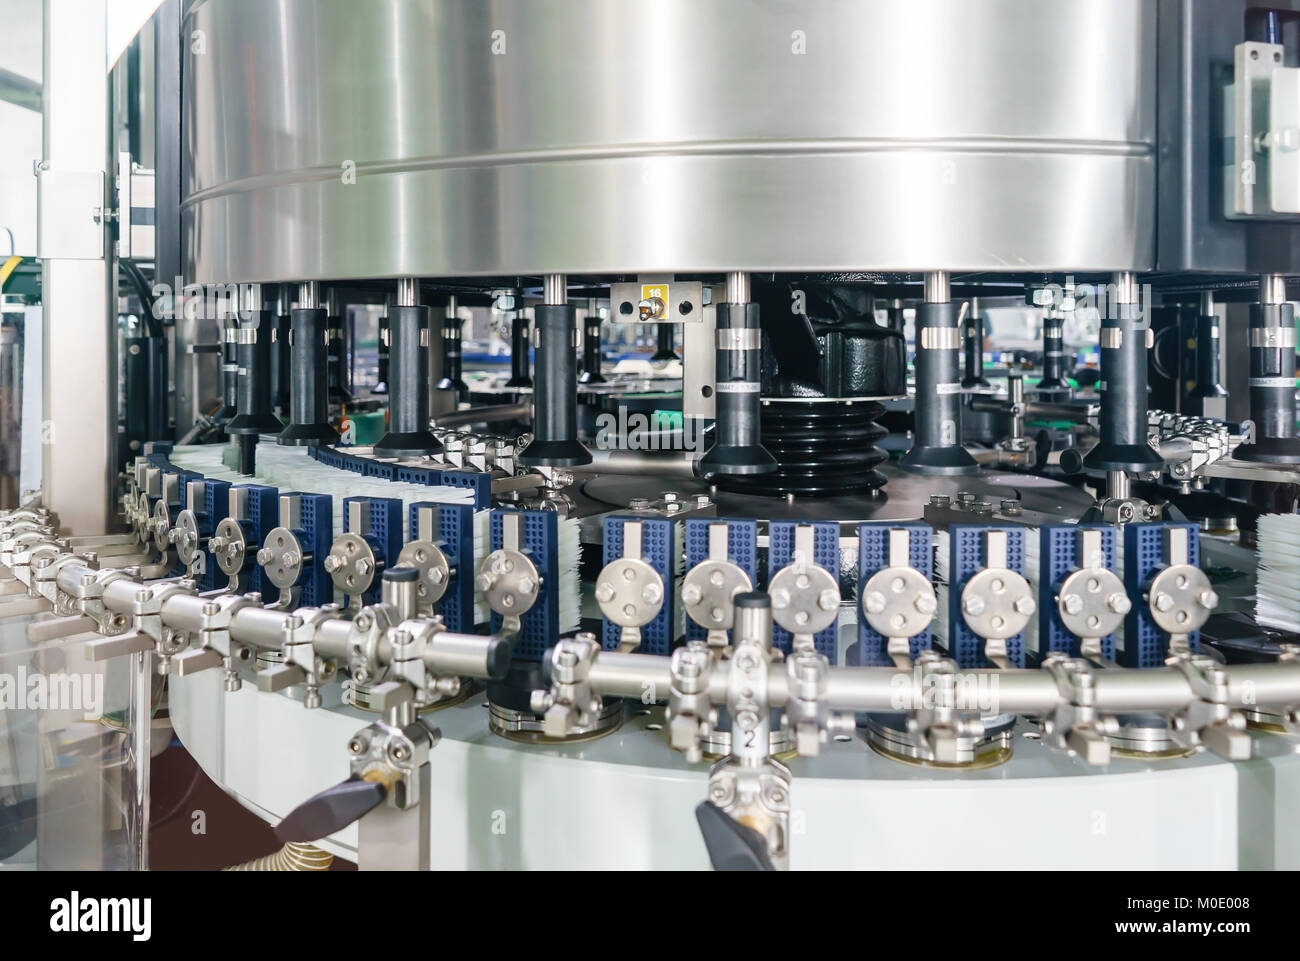 Automated labeling machine equipment with conveyor belt in a beverage factory Stock Photo